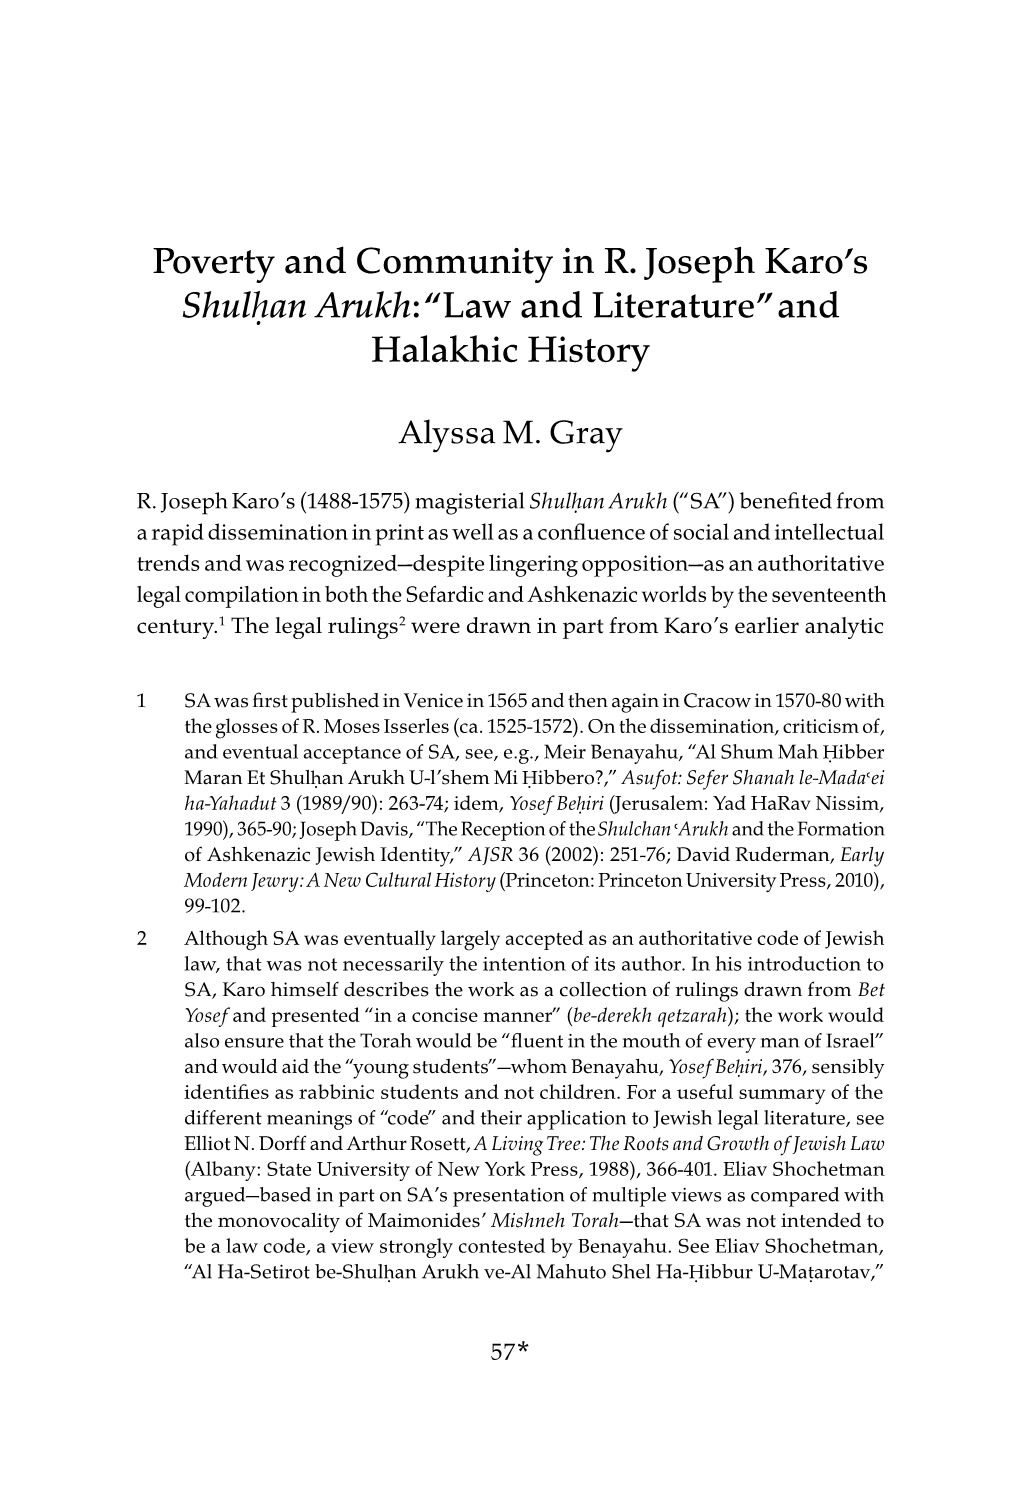 Poverty and Community in R. Joseph Karo's Shulḥan Arukh: “Law And